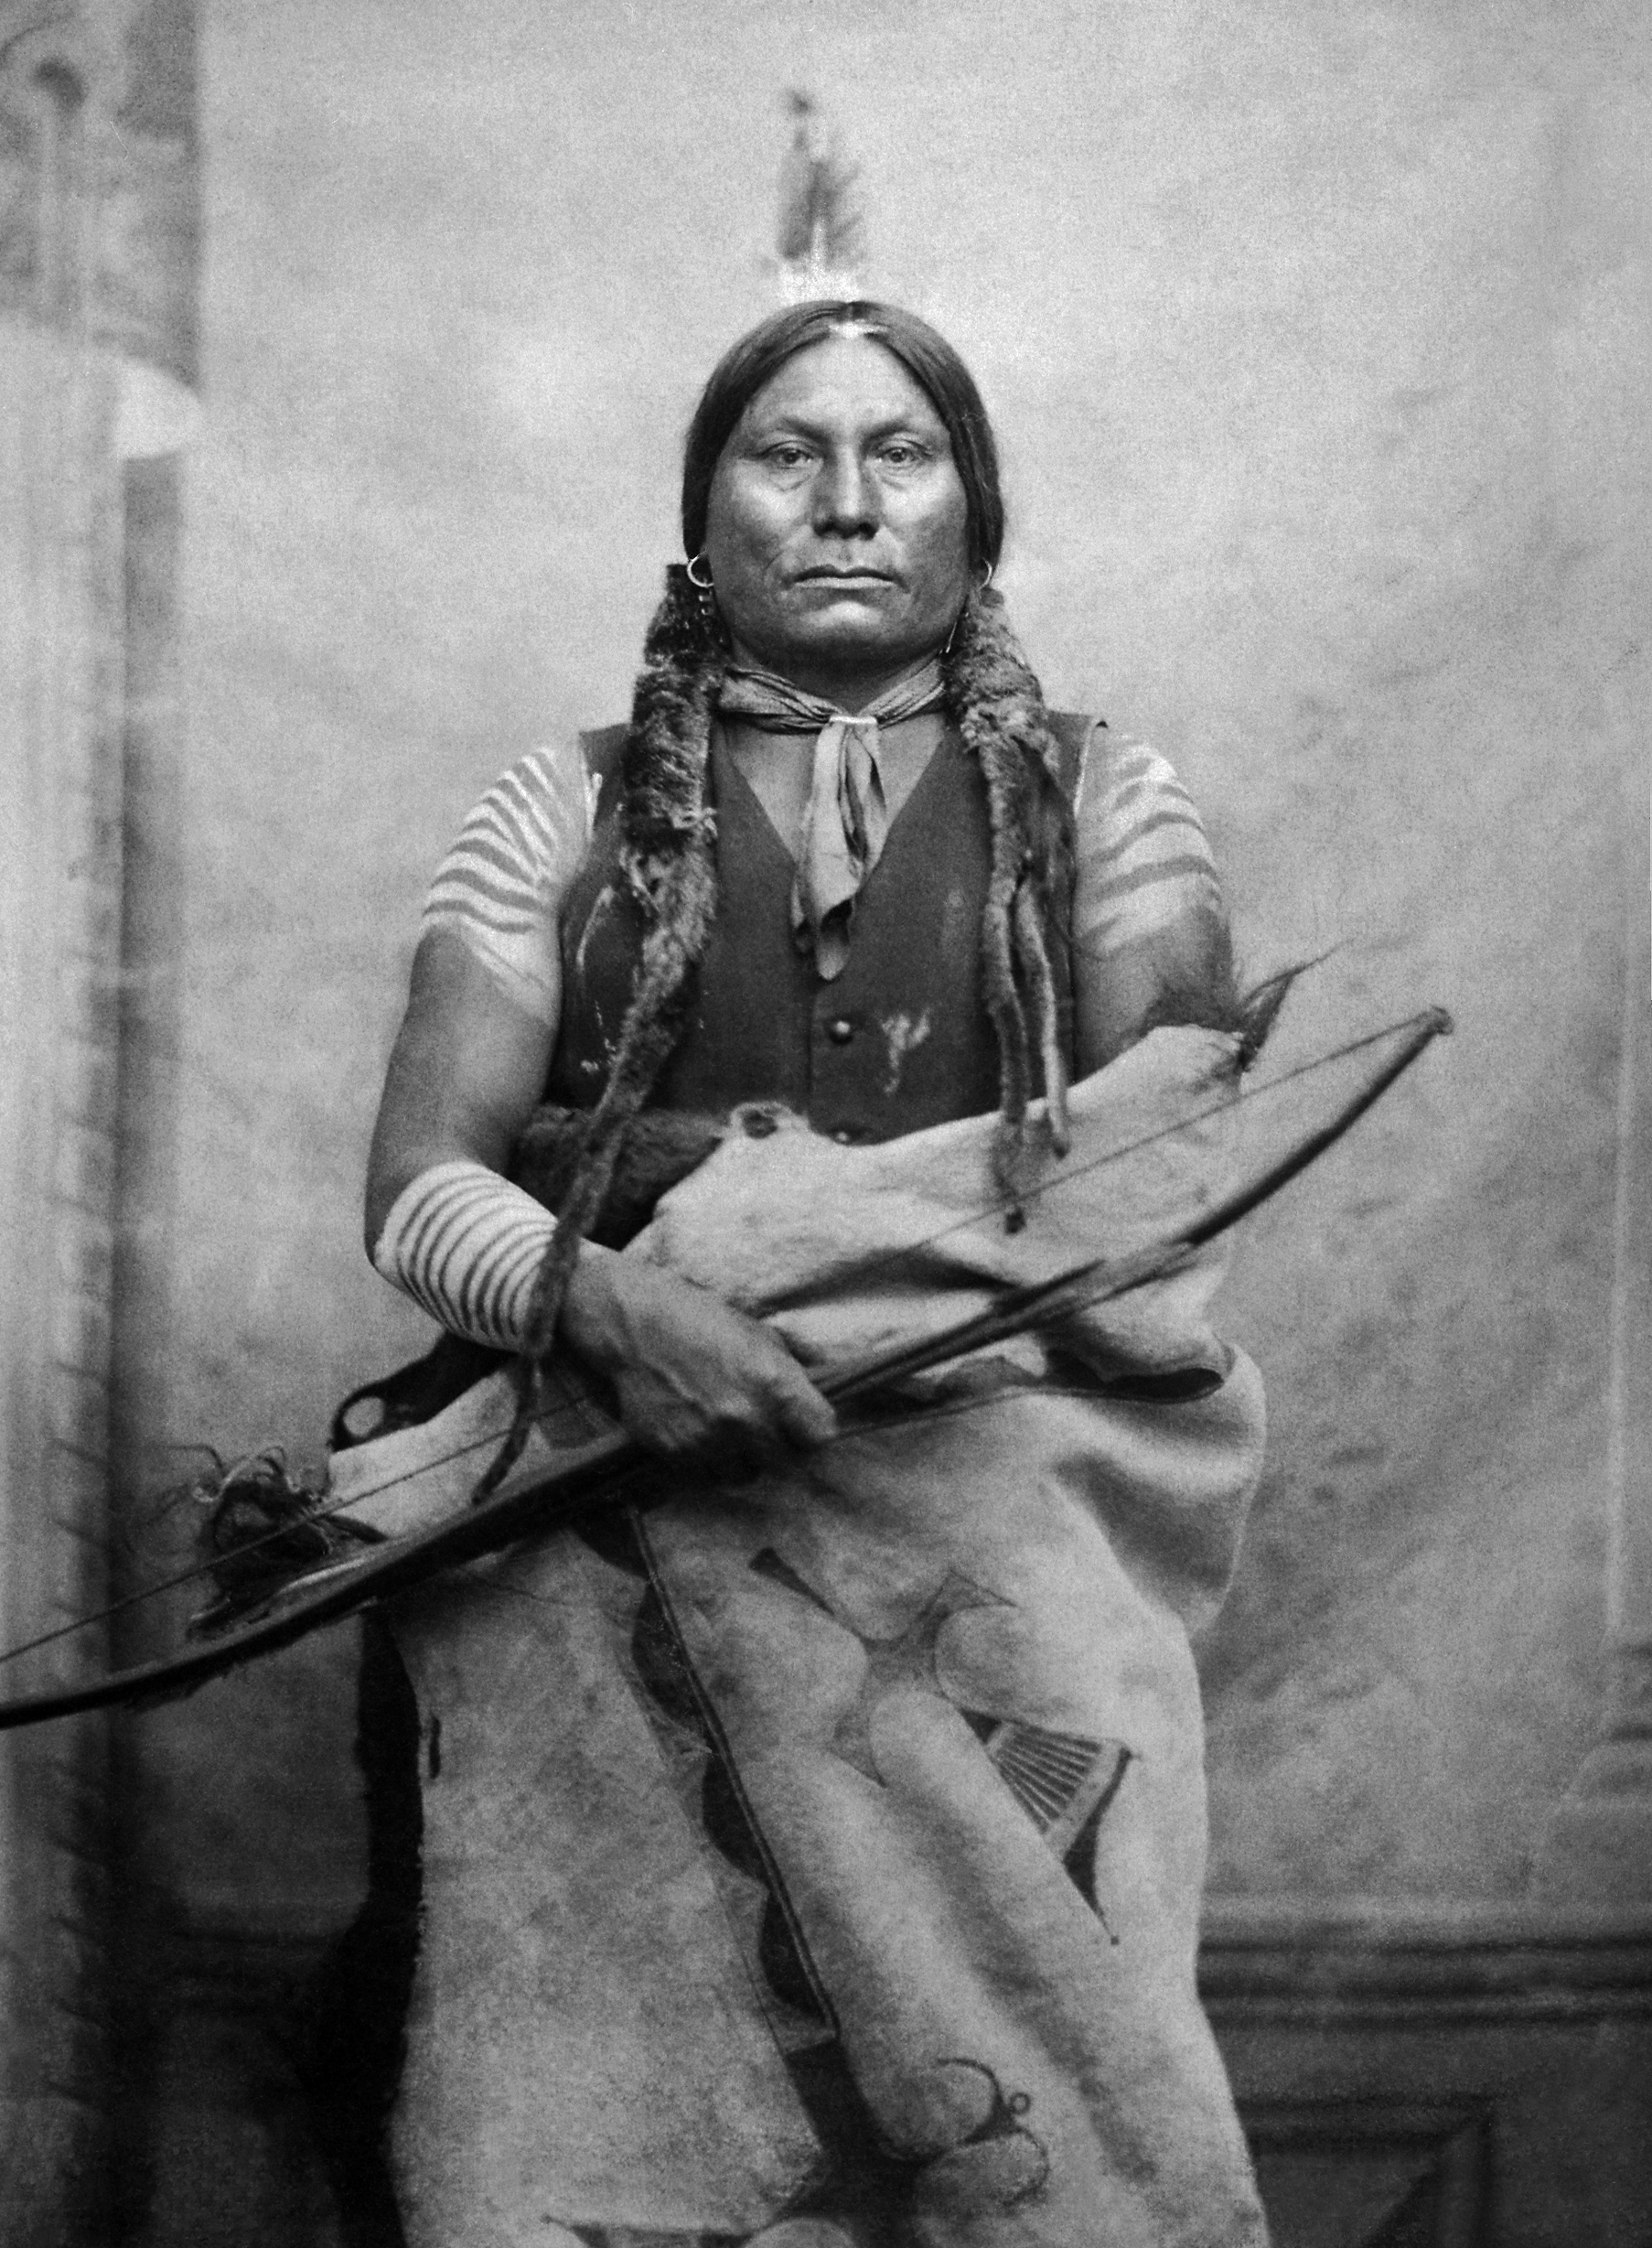 gall_or_gaul_fighting_leader_of_the_combined_sioux_tribes_in_the_battle_of_little_big_horn_from_l_d_greene_album_nara_533088restoredh.jpg